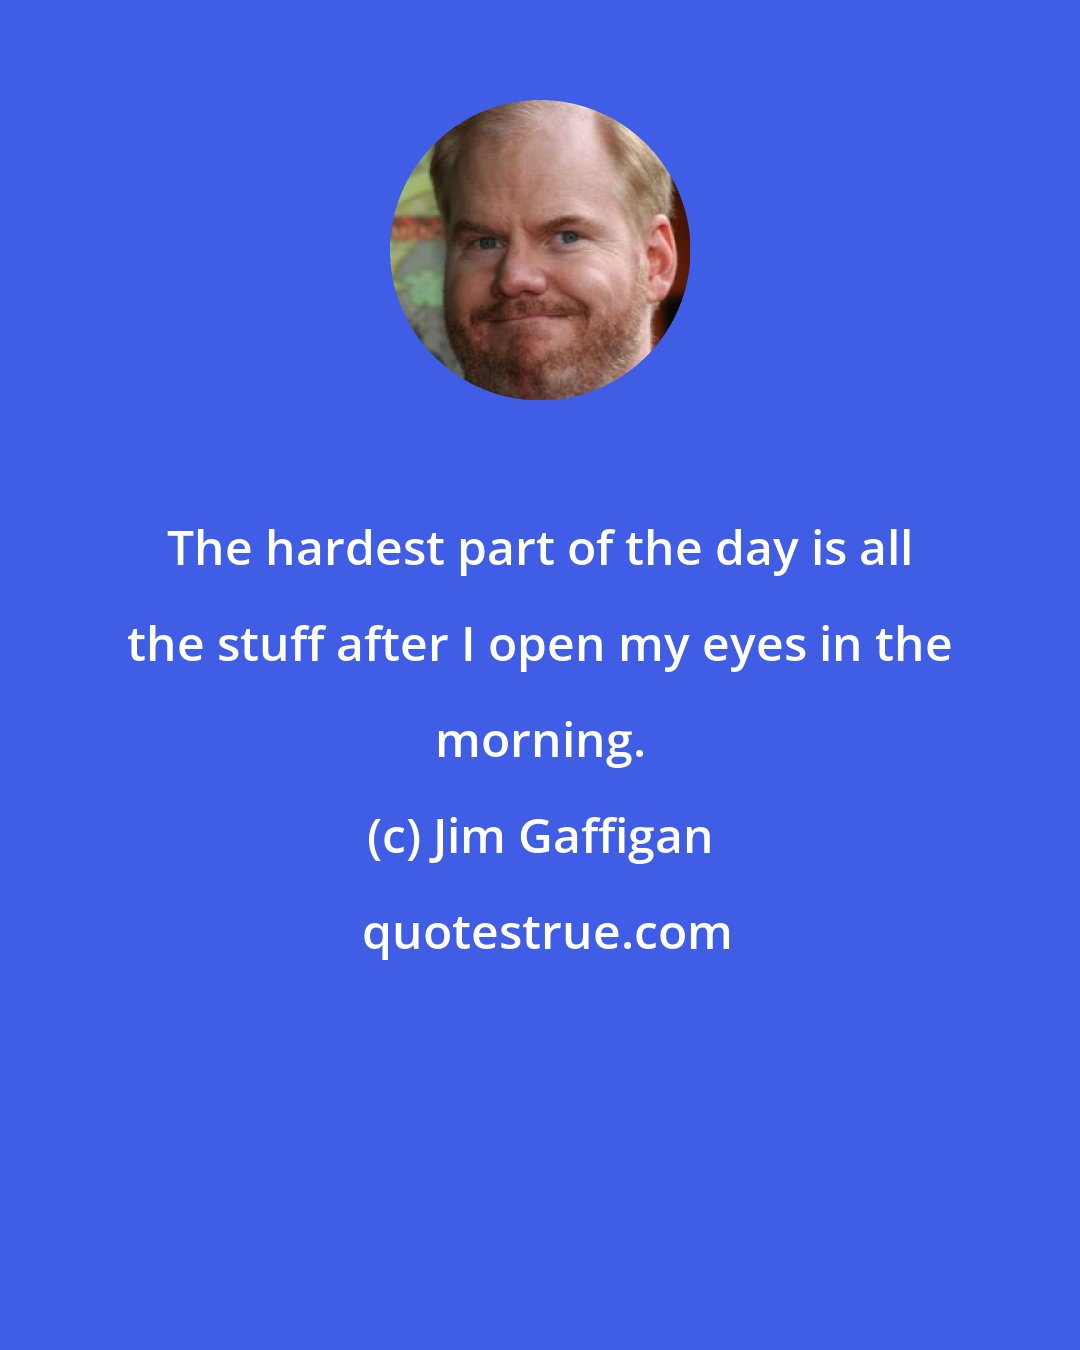 Jim Gaffigan: The hardest part of the day is all the stuff after I open my eyes in the morning.